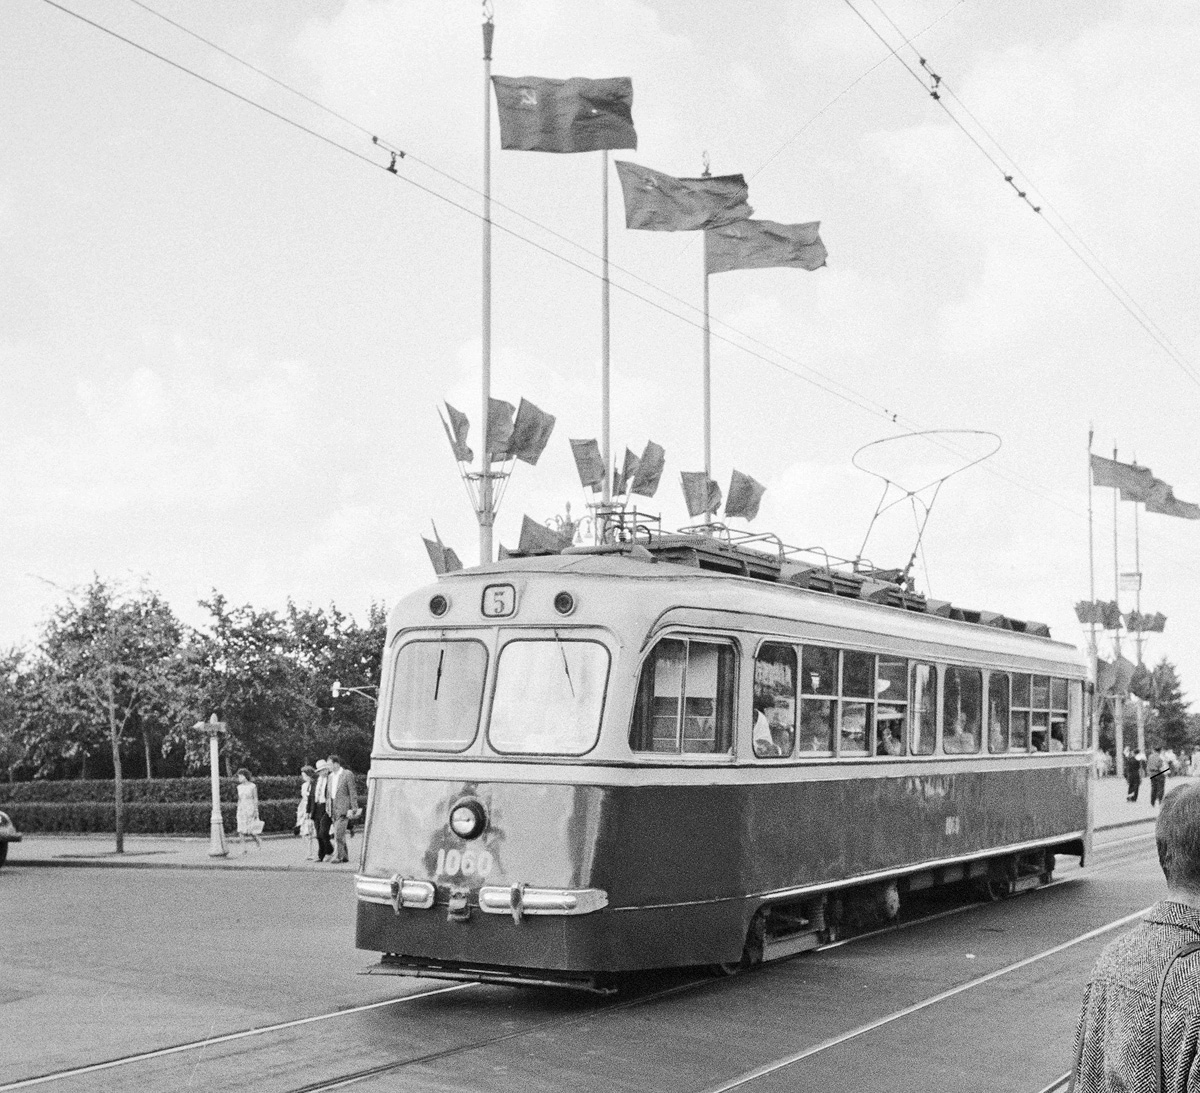 Moscow, M-38 # 1060; Moscow — Historical photos — Tramway and Trolleybus (1946-1991)